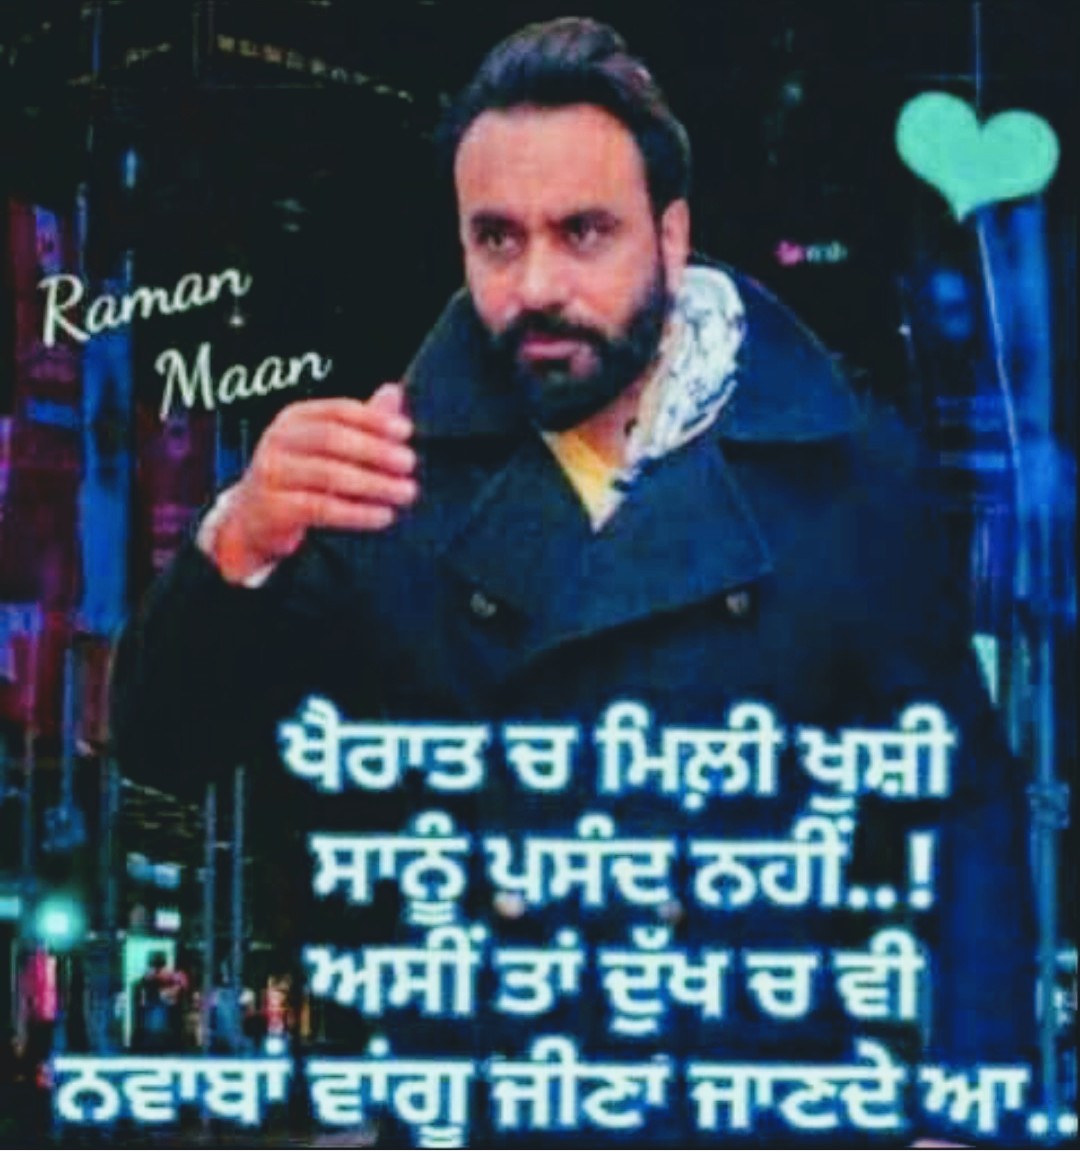 Wishing you a very happy birthday to you the living legend one and only babbu maan Saab      